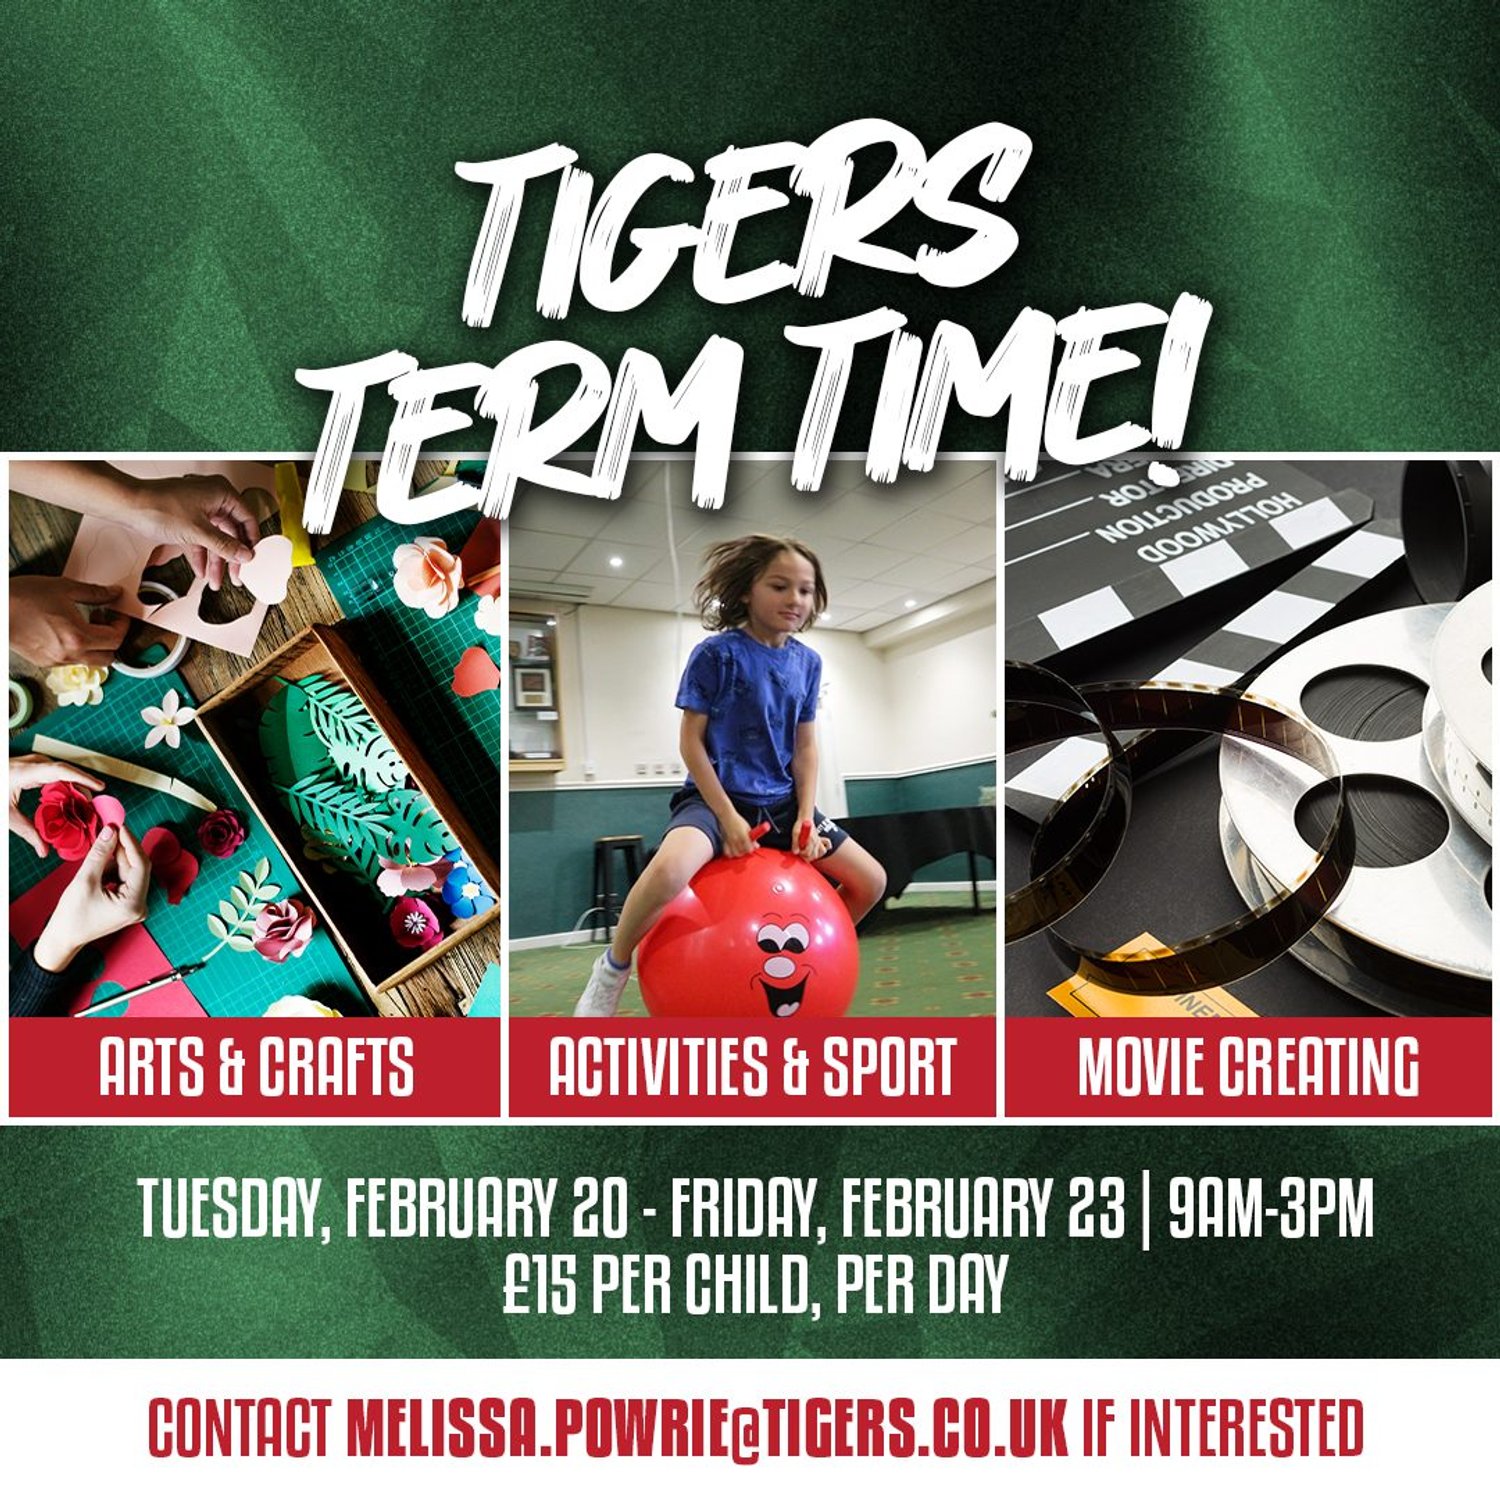 Tigers Term Time